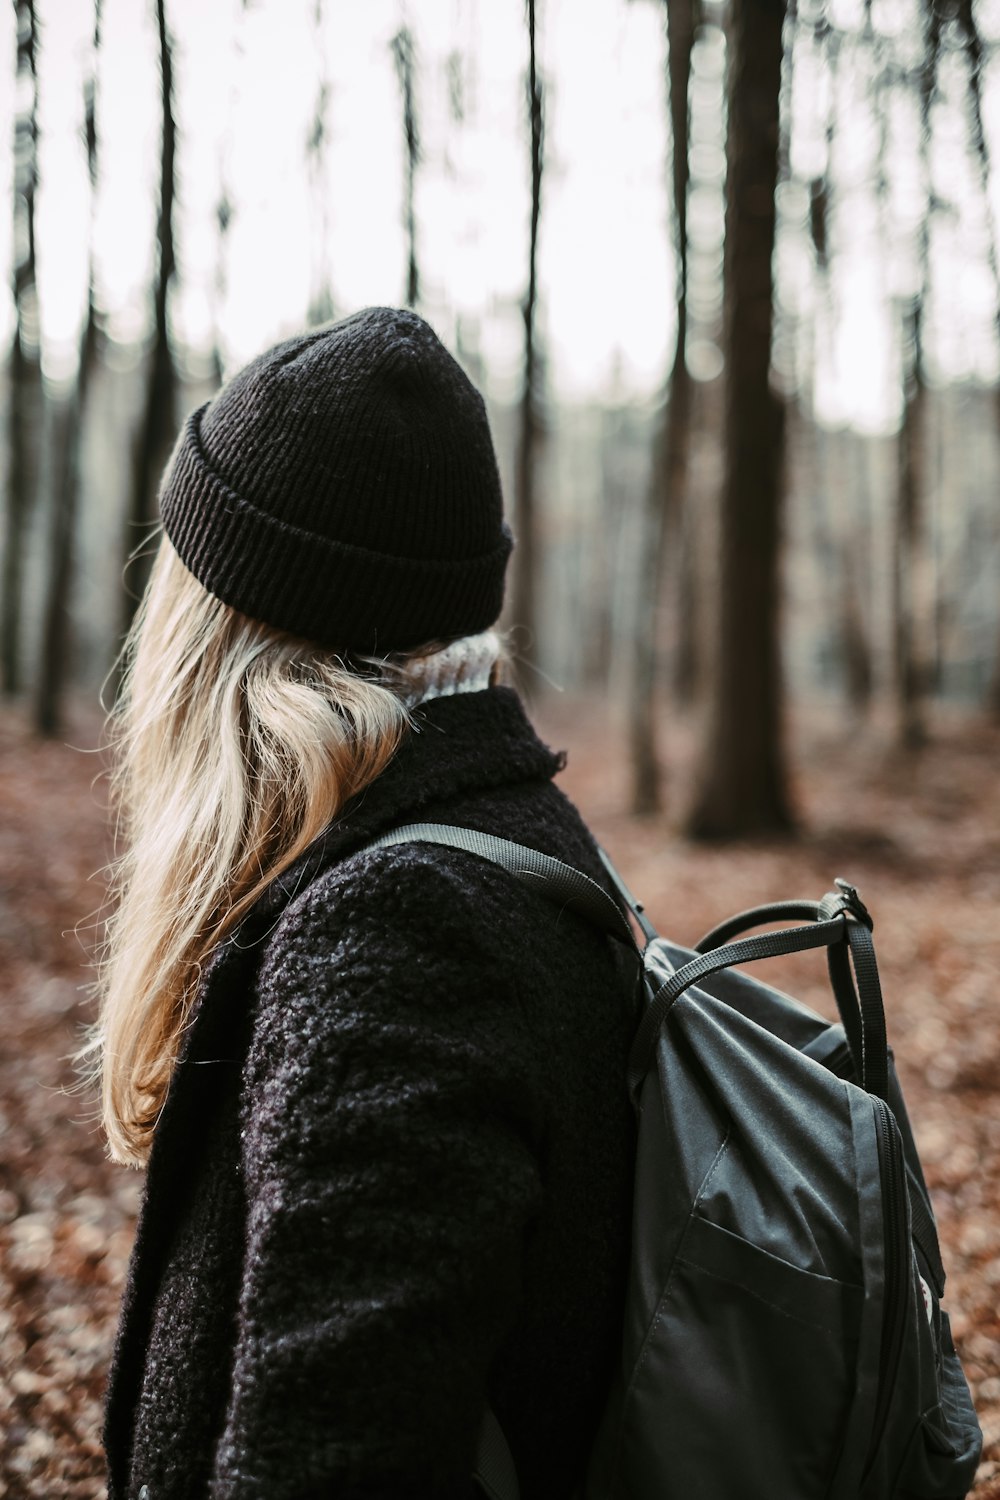 woman wearing black knit cap and jacket with backpack in forest during daytime